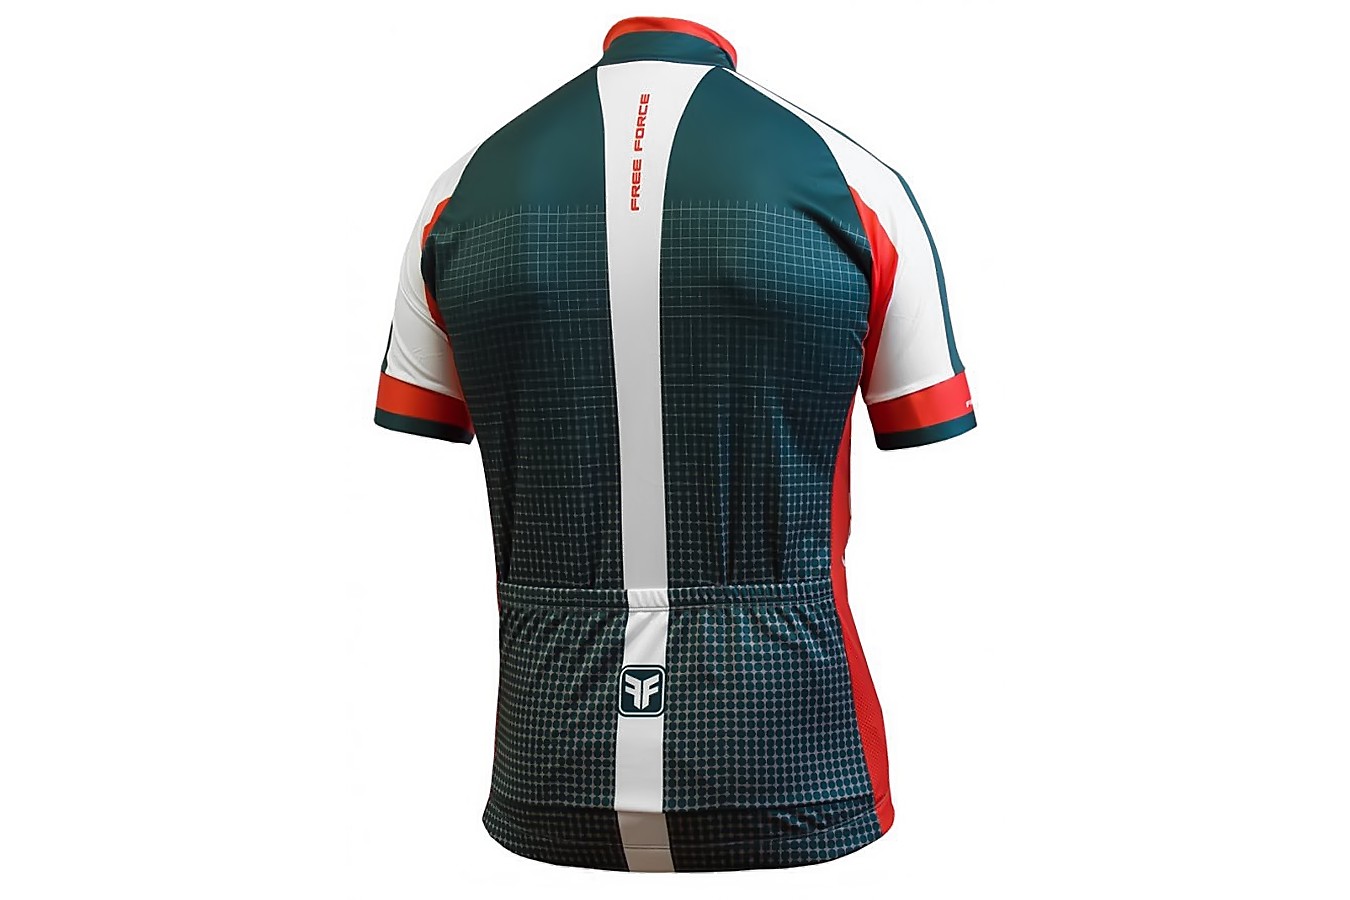 Camisa Ciclista Square - Free Force